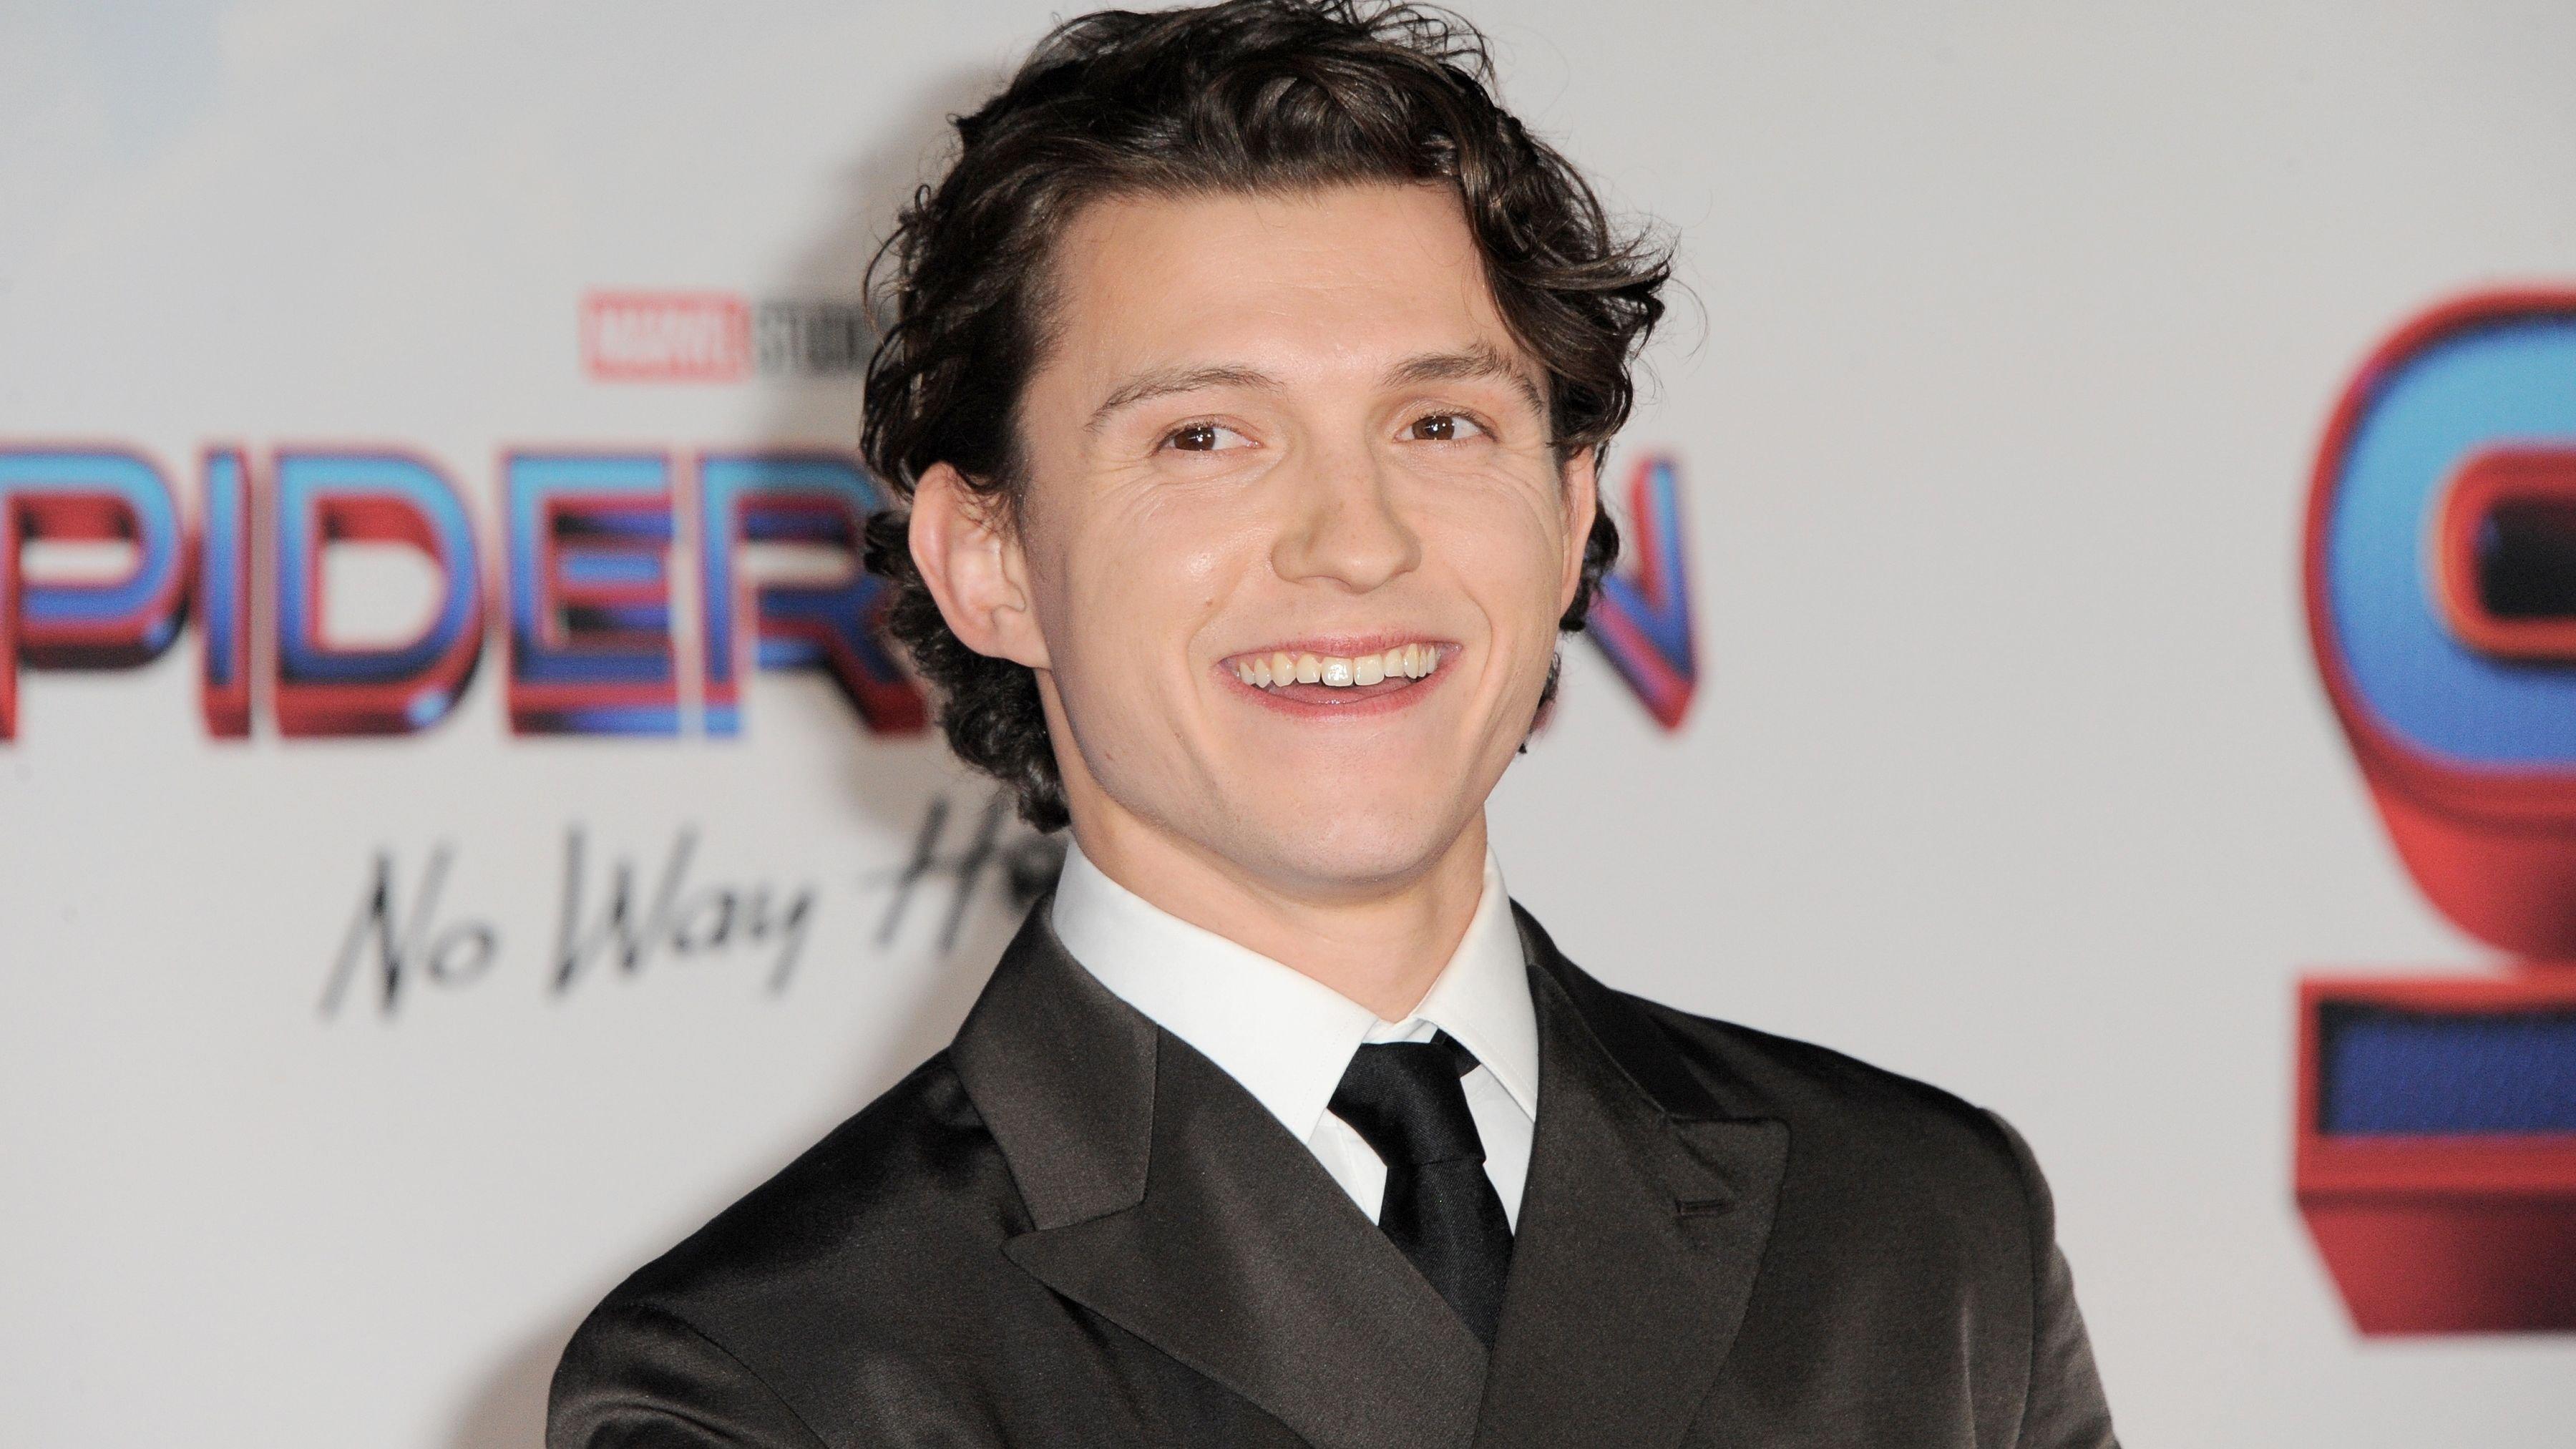 Close up of Tom Holland in a Prada suit at the Spiderman: No Way Home premiere 